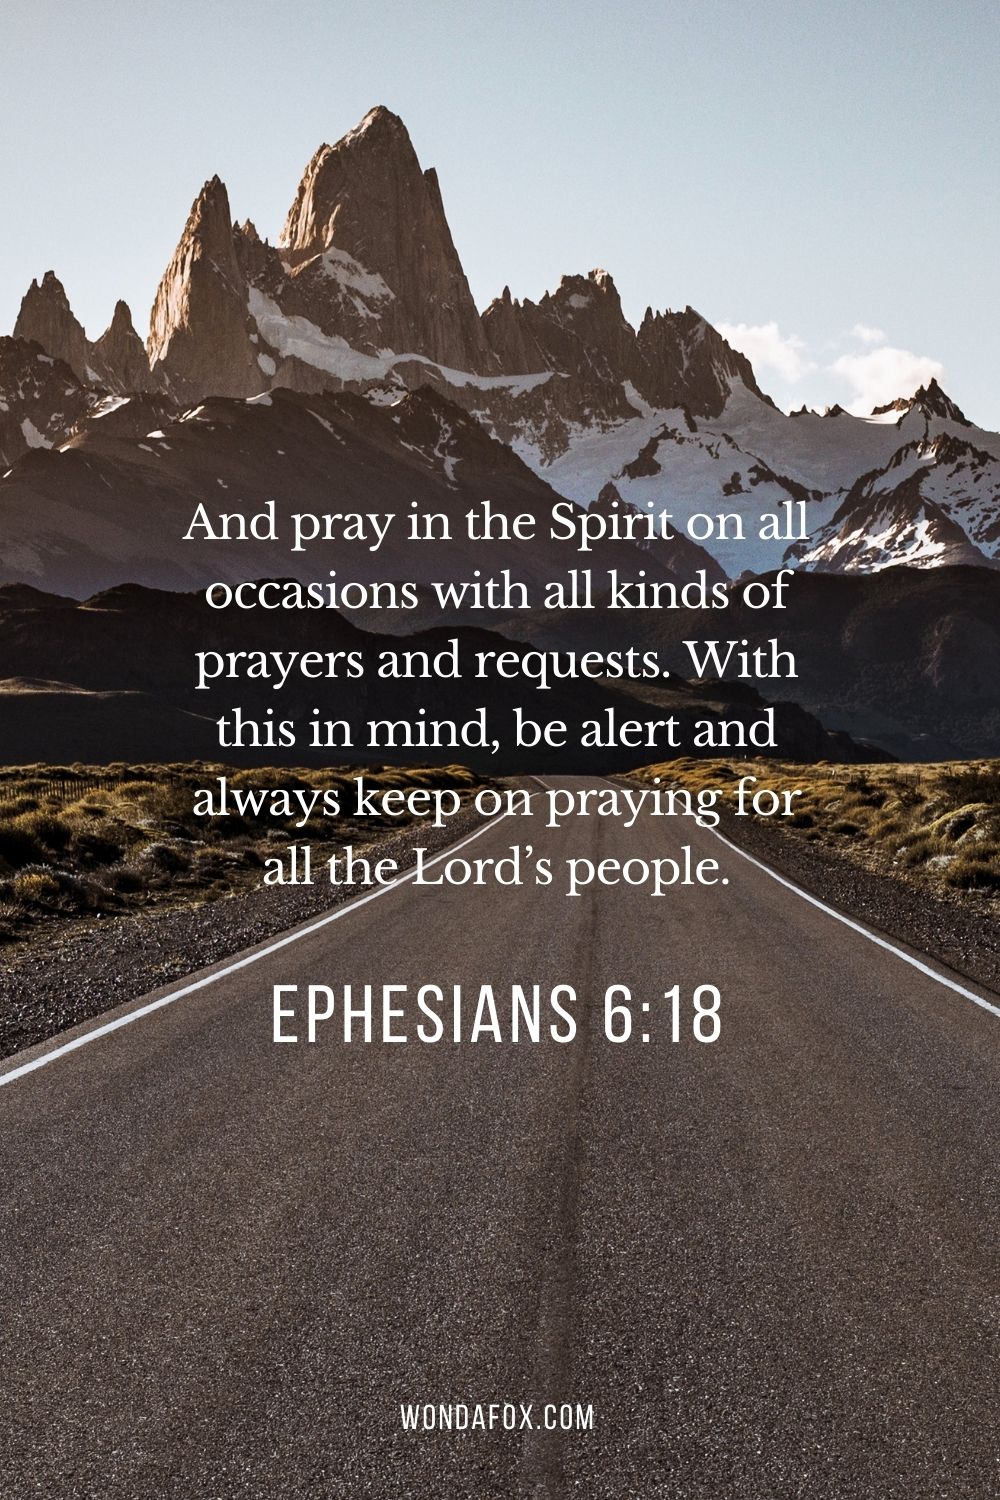 And pray in the Spirit on all occasions with all kinds of prayers and requests. With this in mind, be alert and always keep on praying for all the Lord’s people.